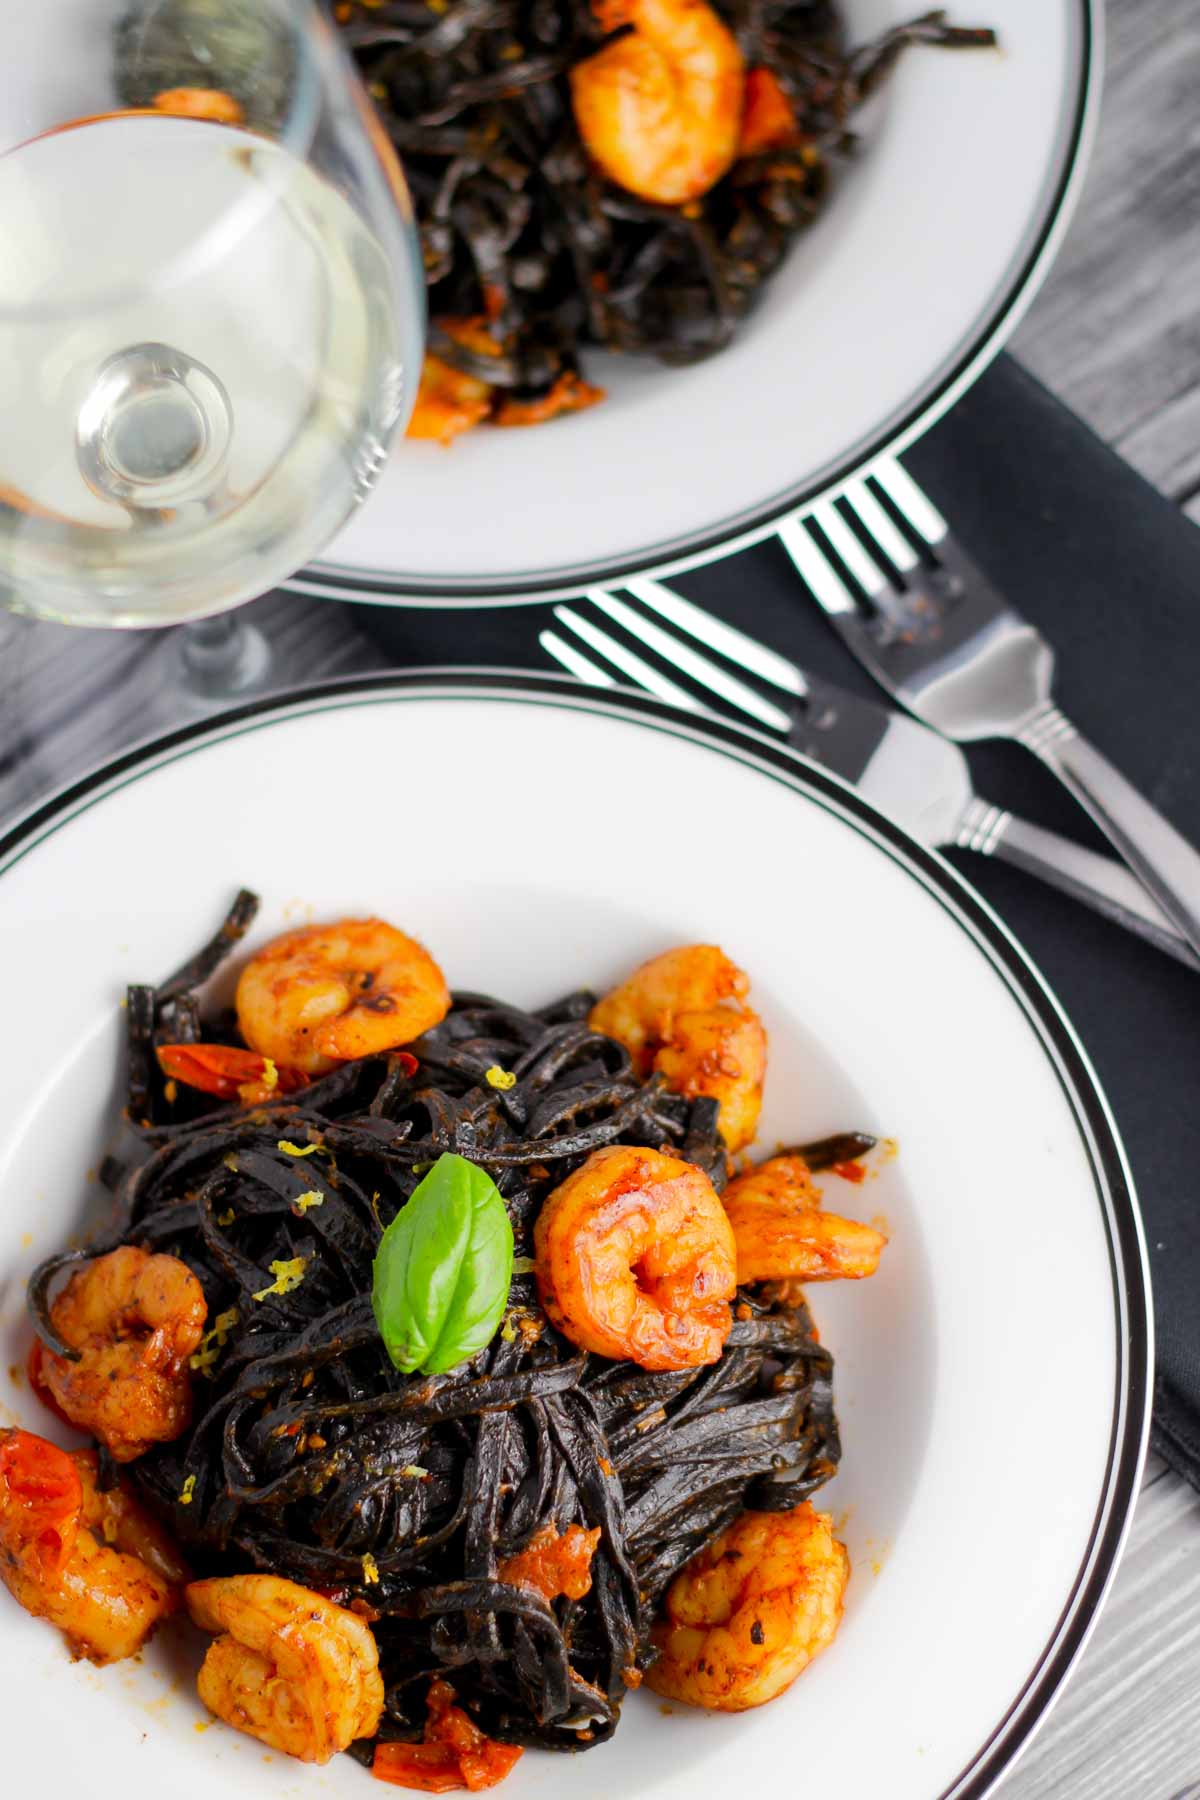 SQUID INK LINGUINI WITH SHRIMP AND CHERRY TOMATOES